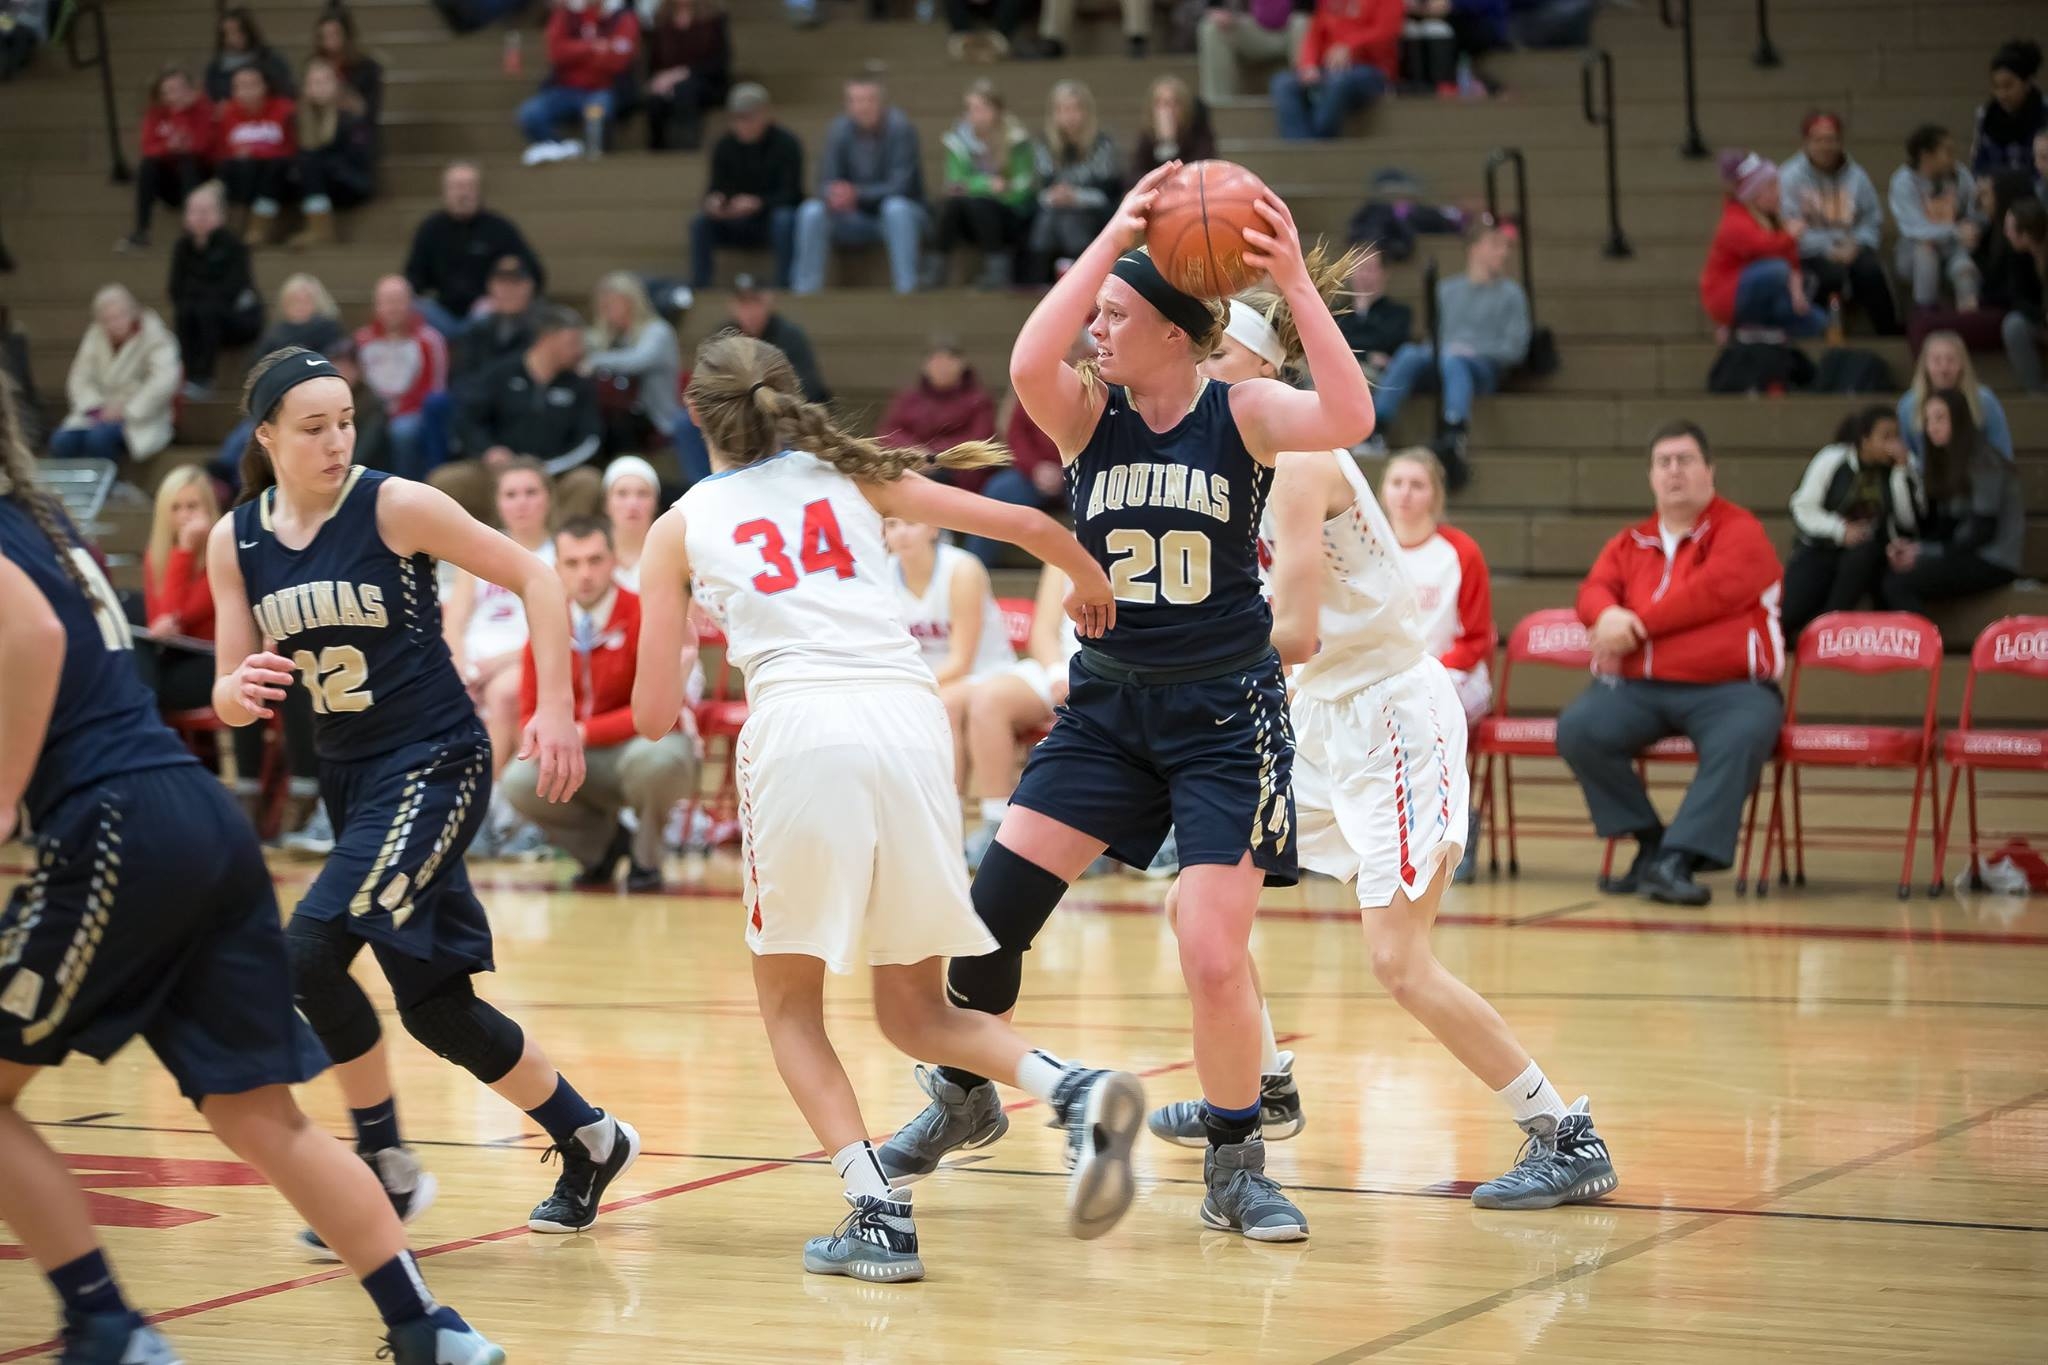 Aquinas (13-0) ranked No. 1 in latest girls basketball poll